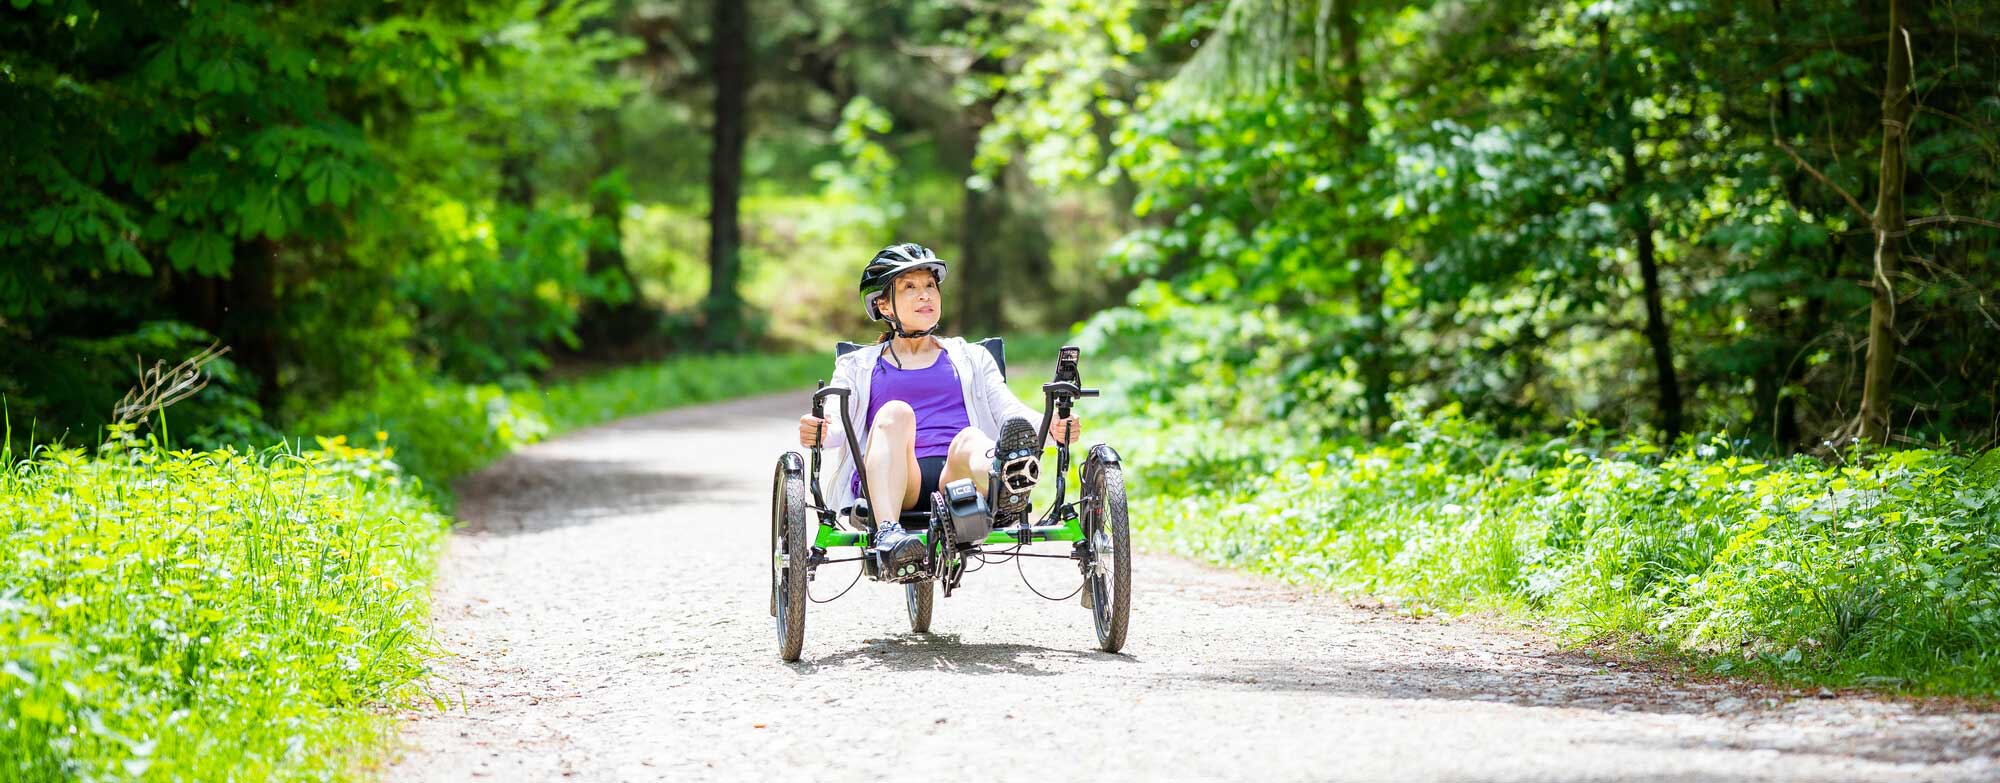 Female using a recumbent ebike in a forest setting. Credit Visit Britain/Peter Kindersley. 